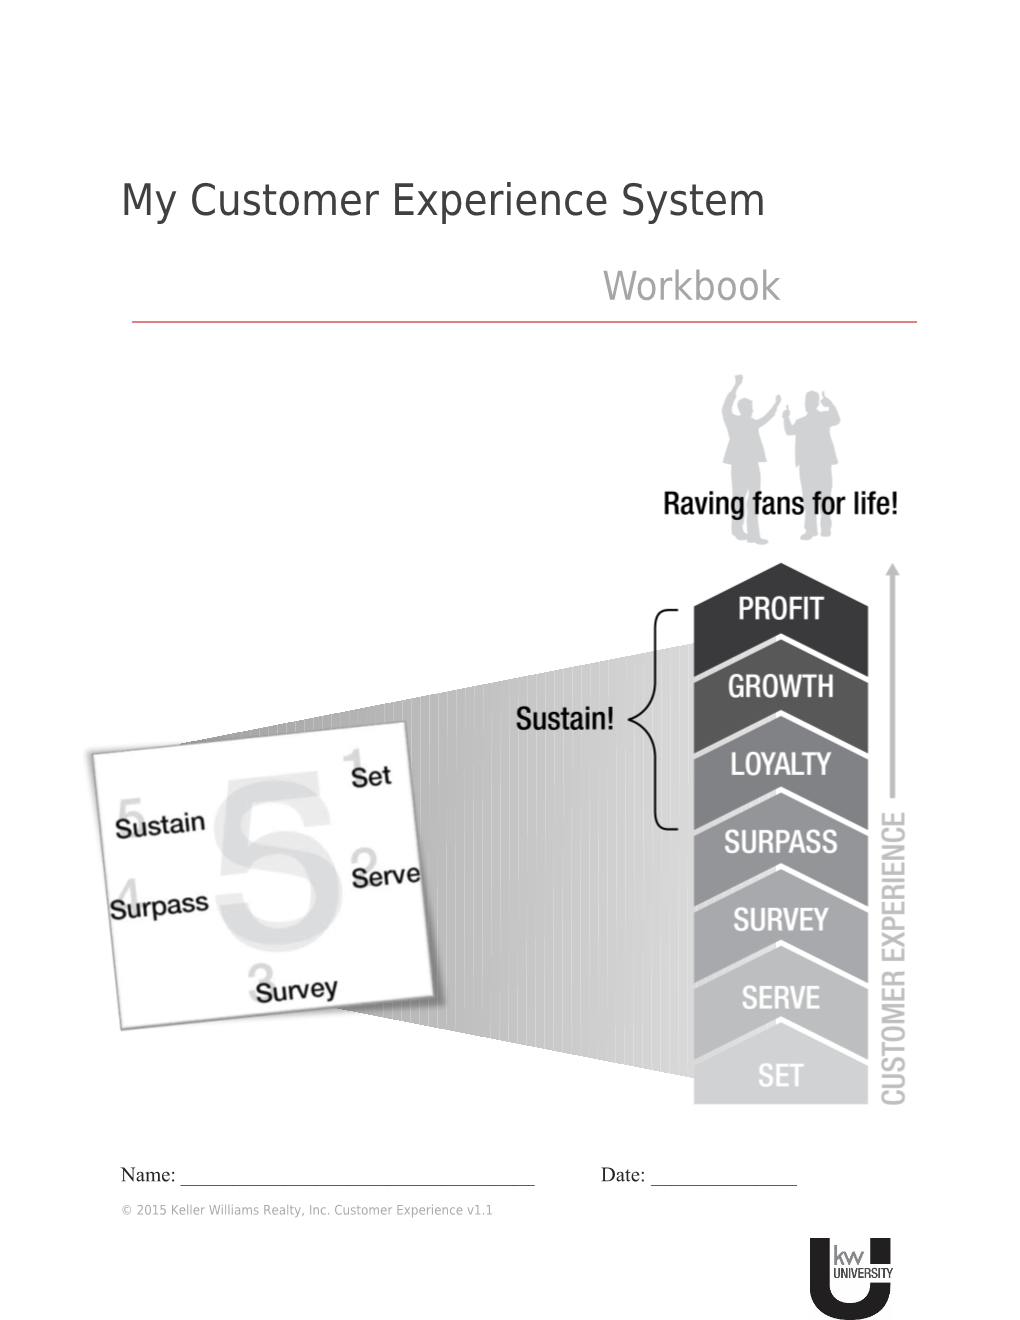 My Customer Experience System